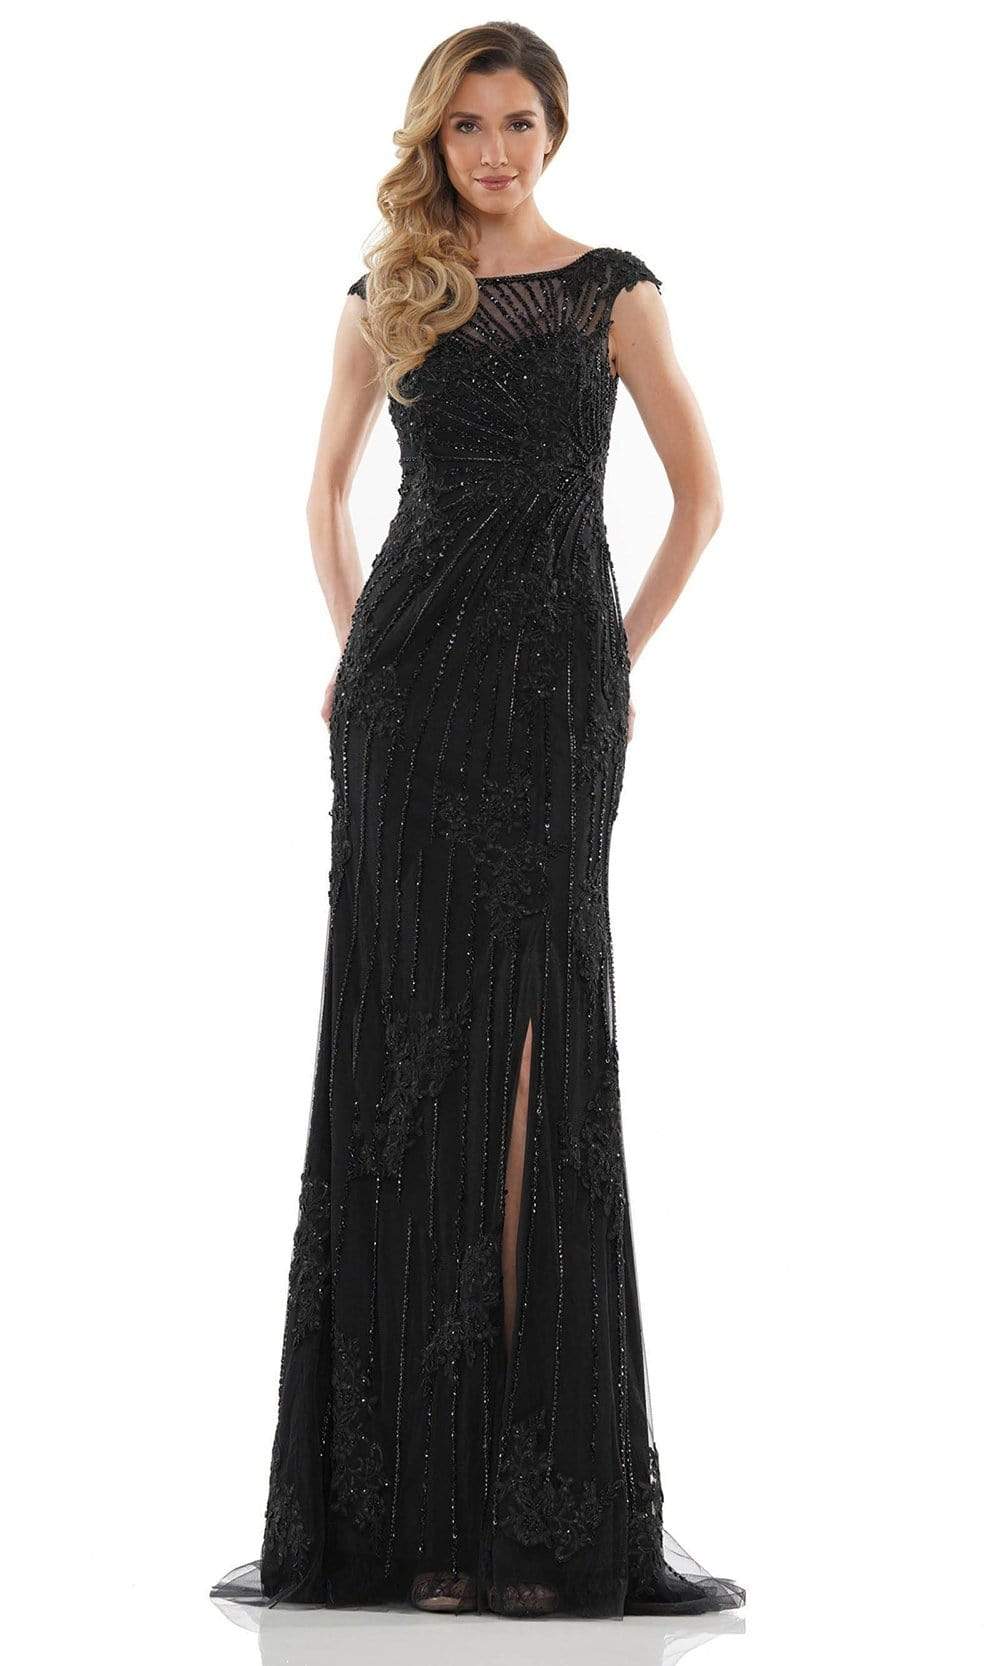 Marsoni by Colors - MV1128 Beaded High Slit Evening Gown Mother of the Bride Dresses 4 / Black